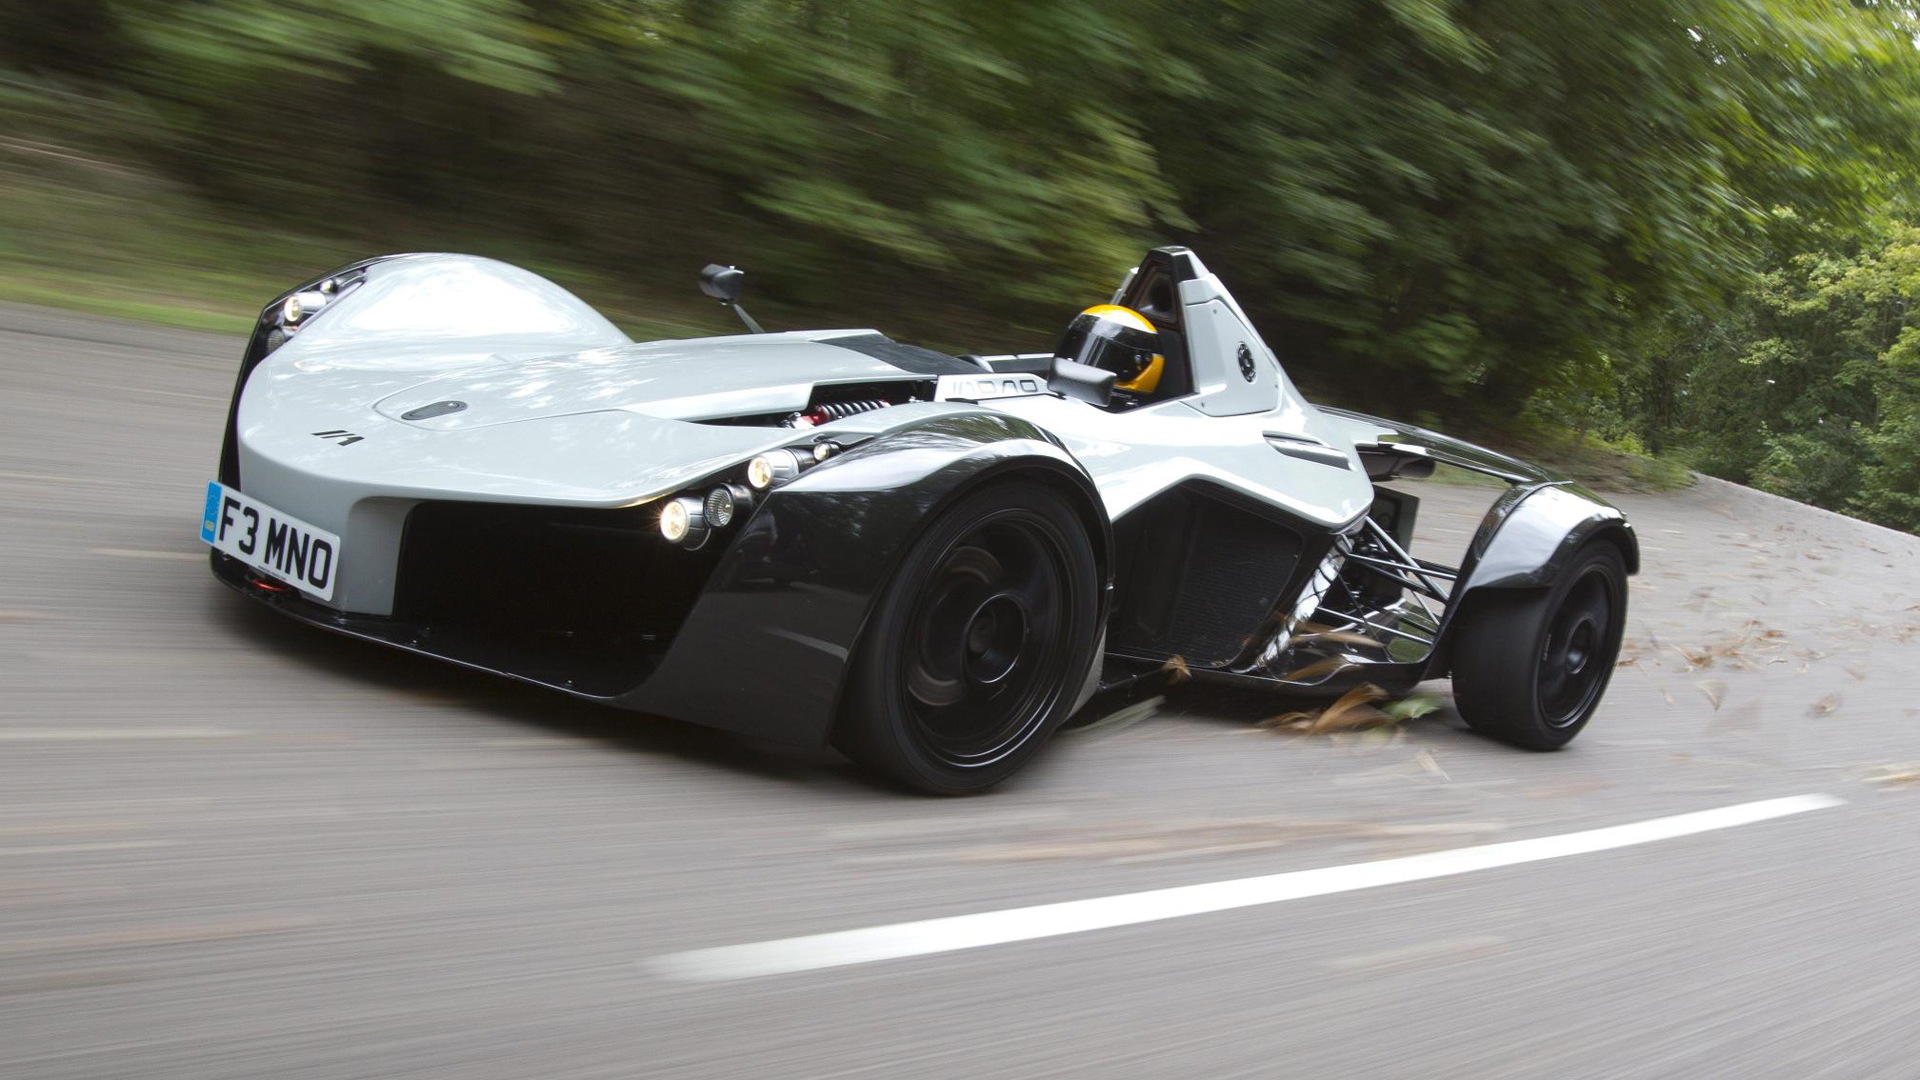 BAC Mono with wider chassis